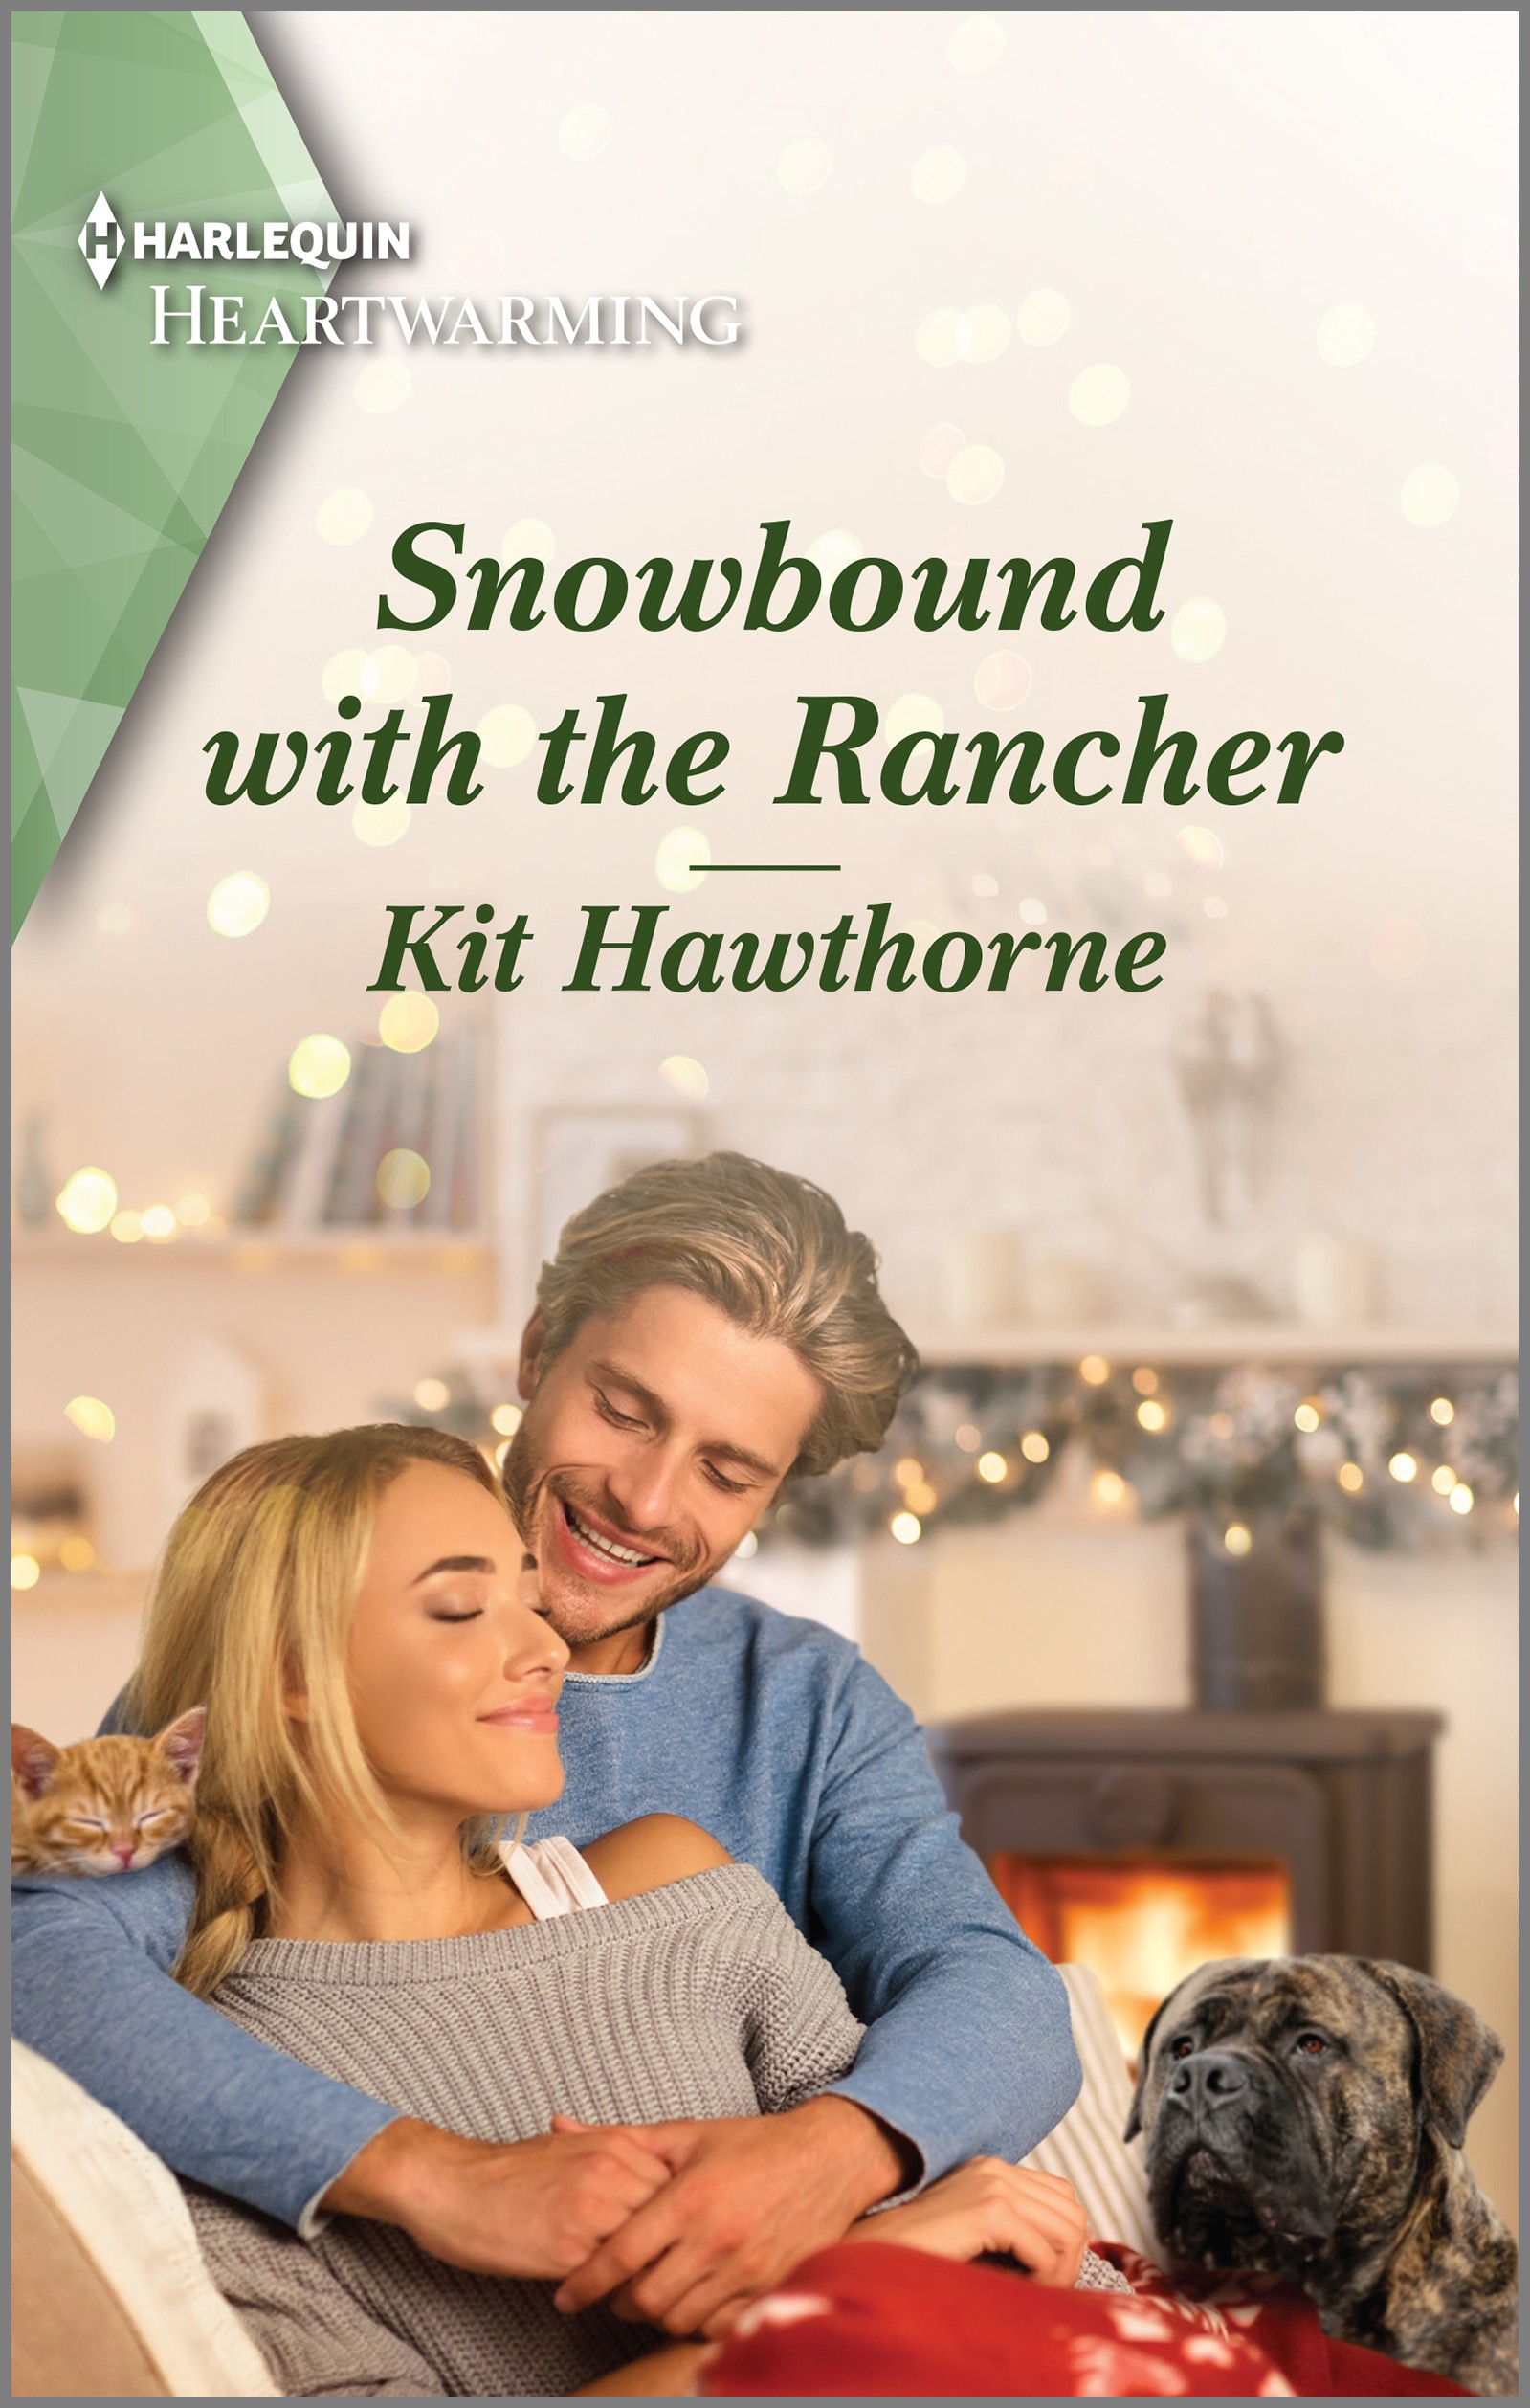 SNOWBOUND WITH THE RANCHER by Kit Hawthorne